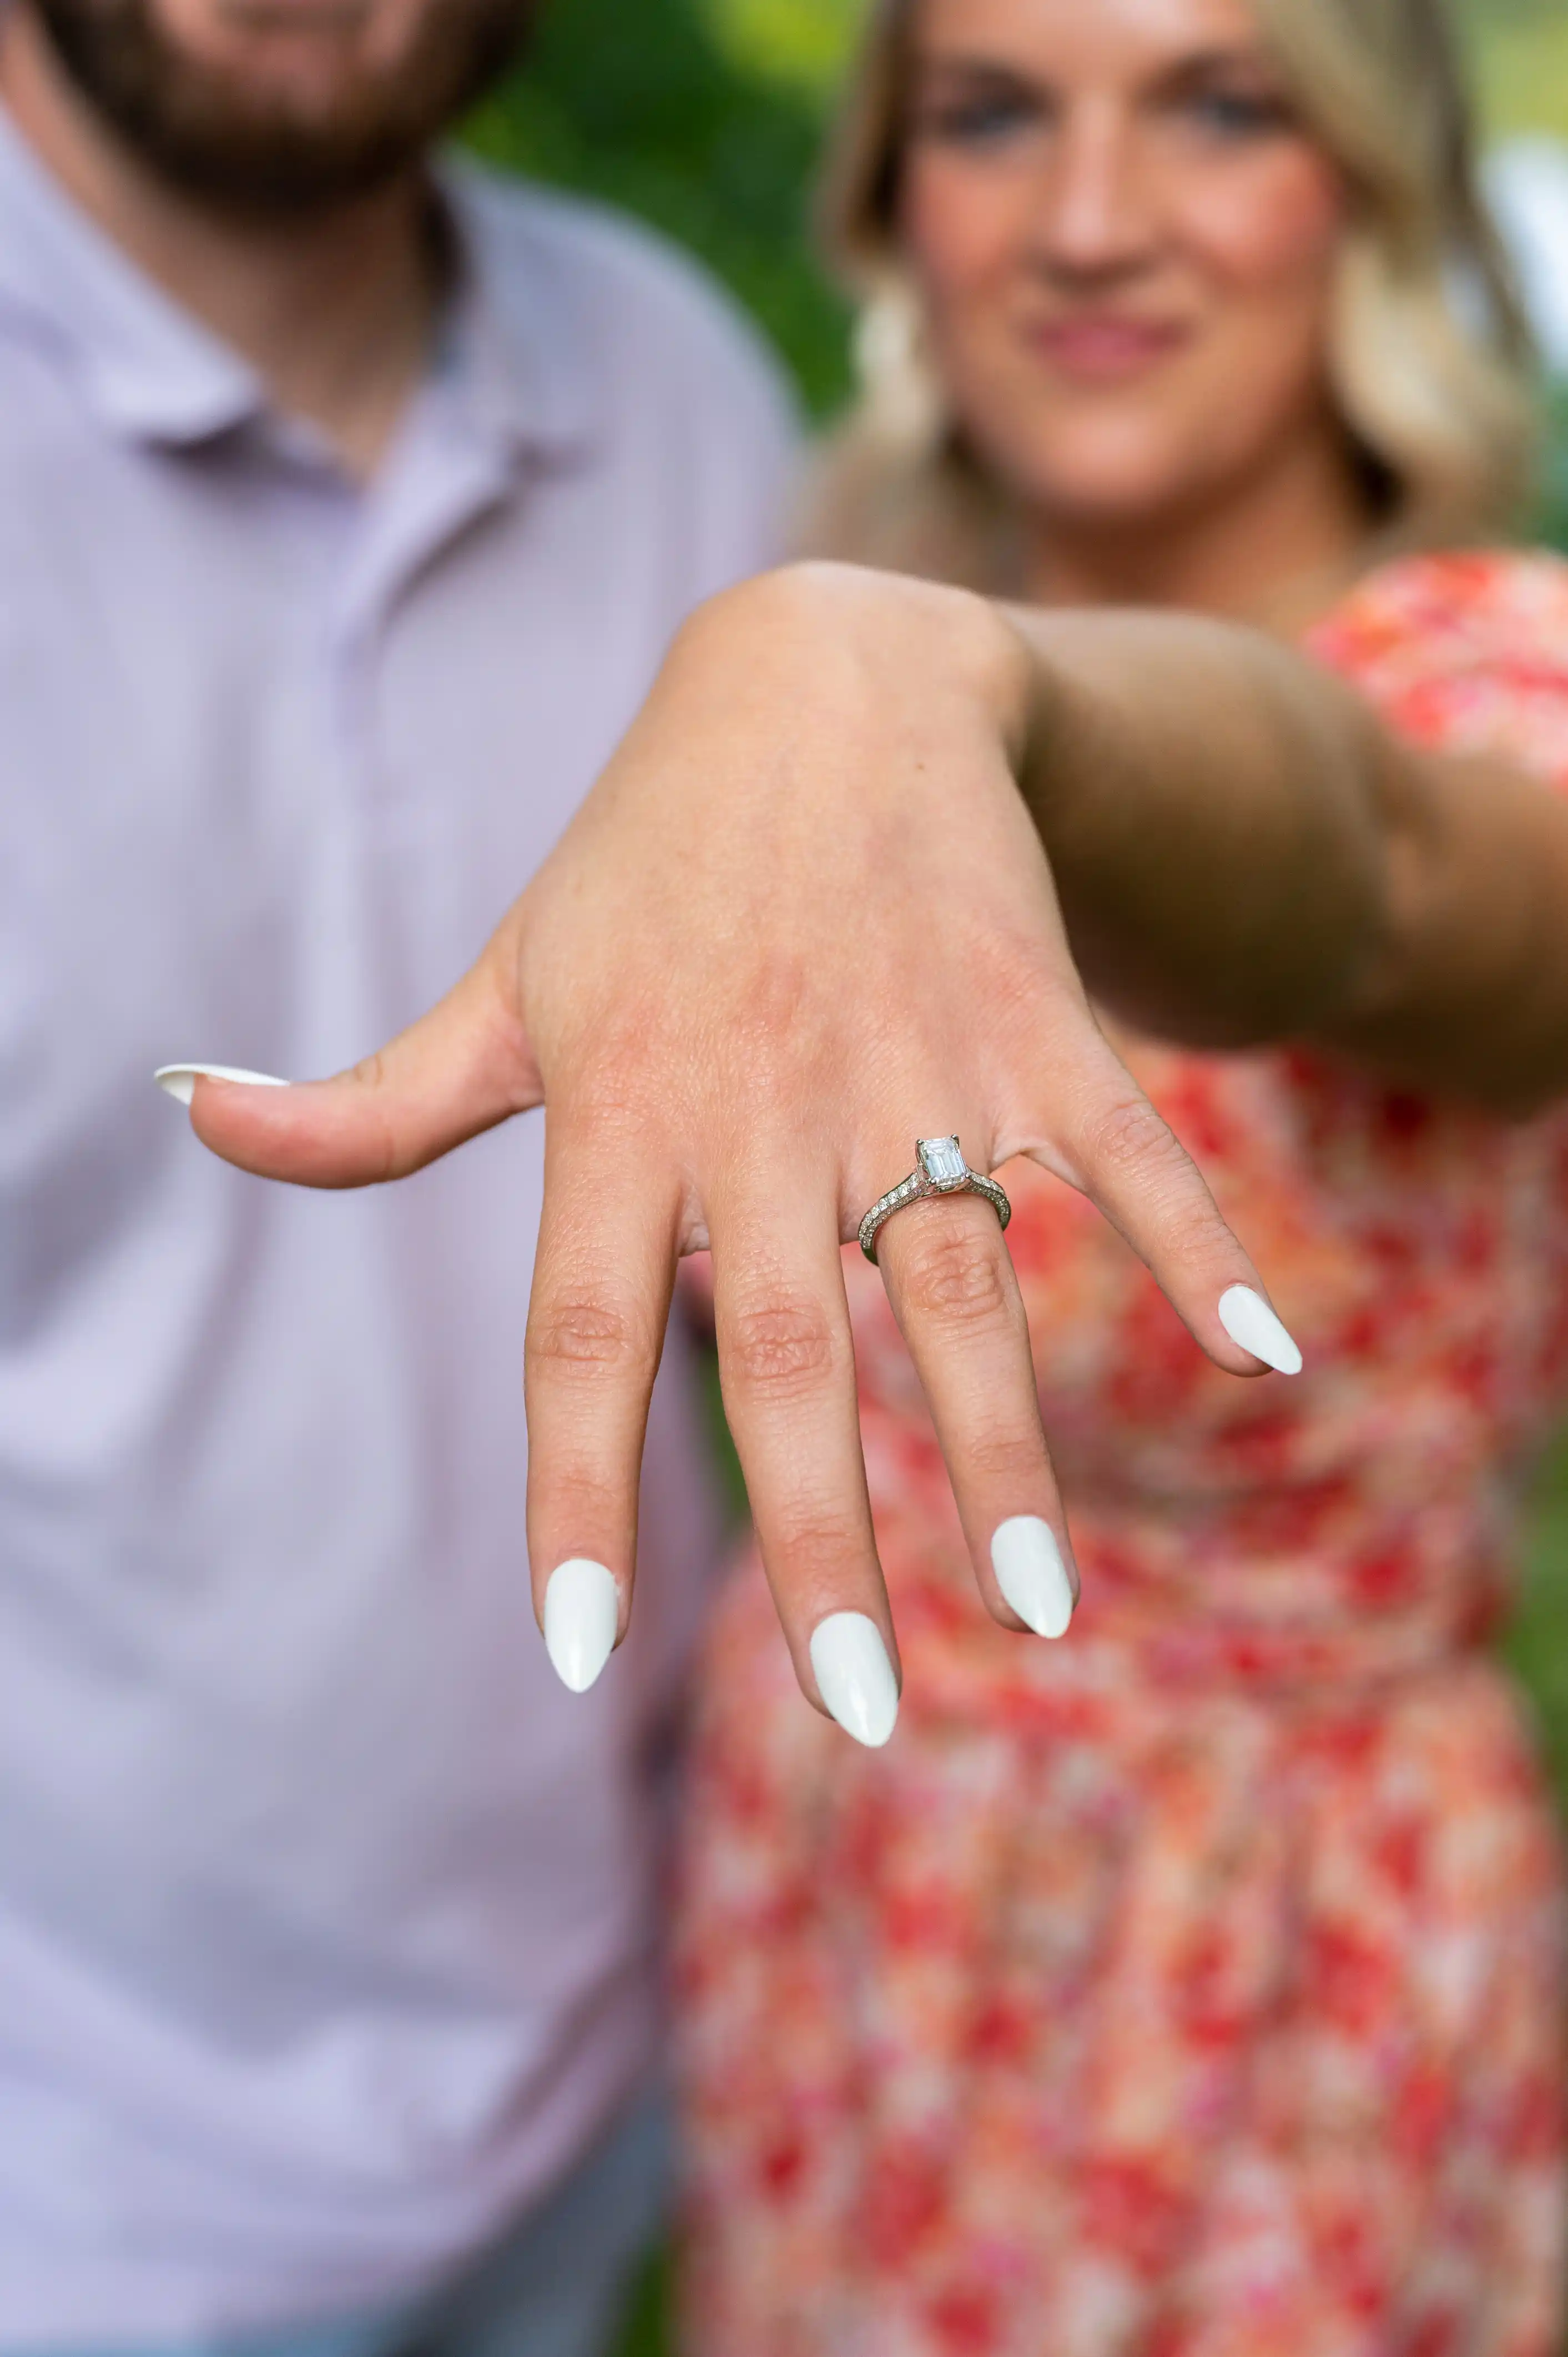 Woman showing engagement ring on her finger with an out-of-focus man in the background.